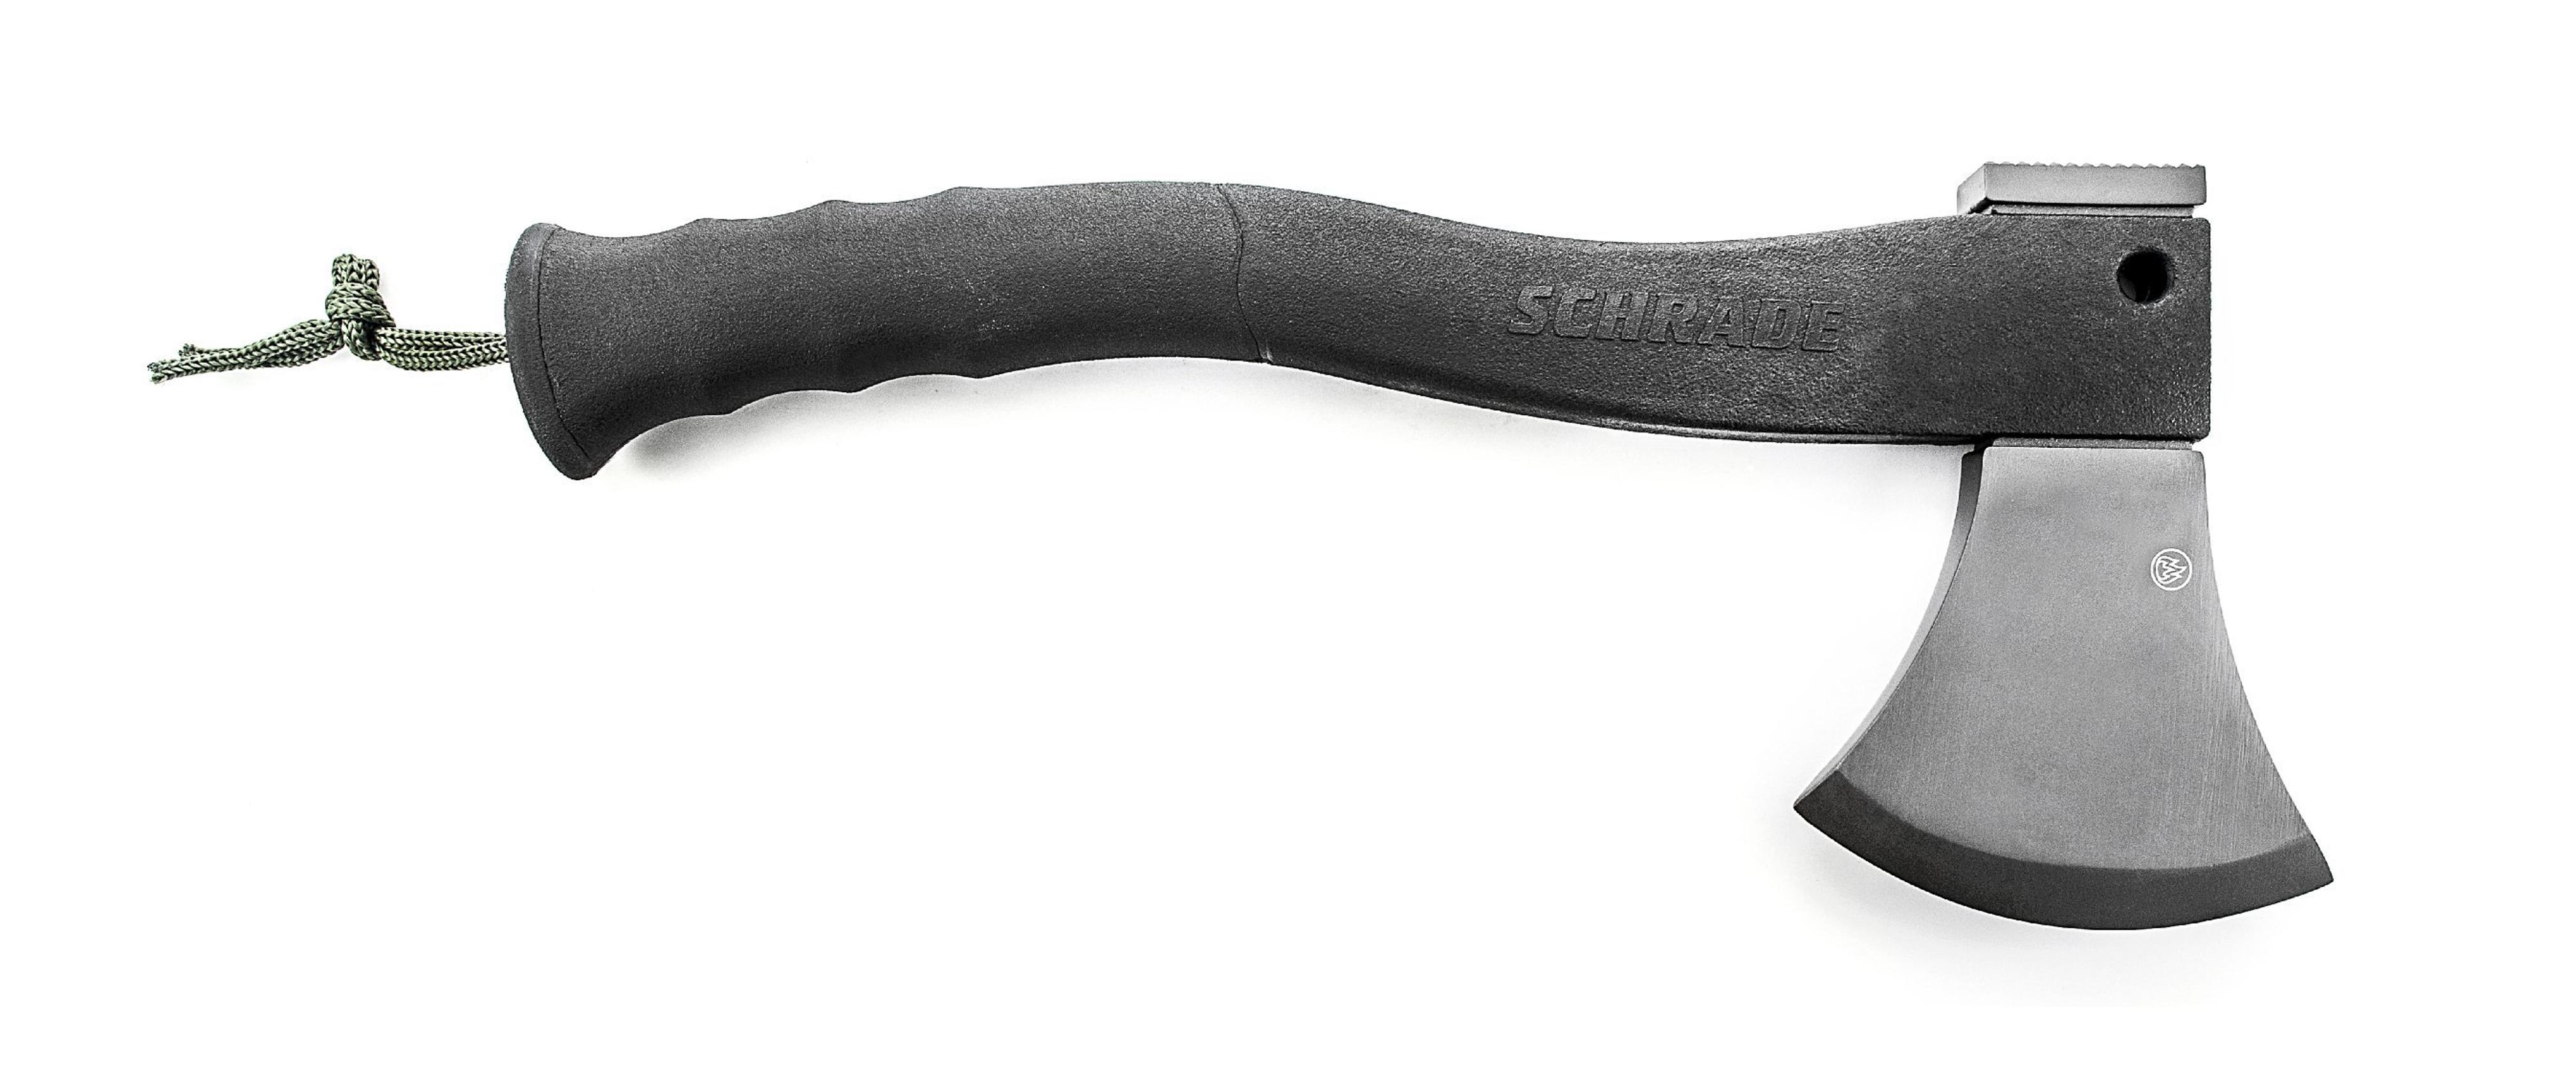 Schrade Axe with Fire Starter and Rubber Handle, Small